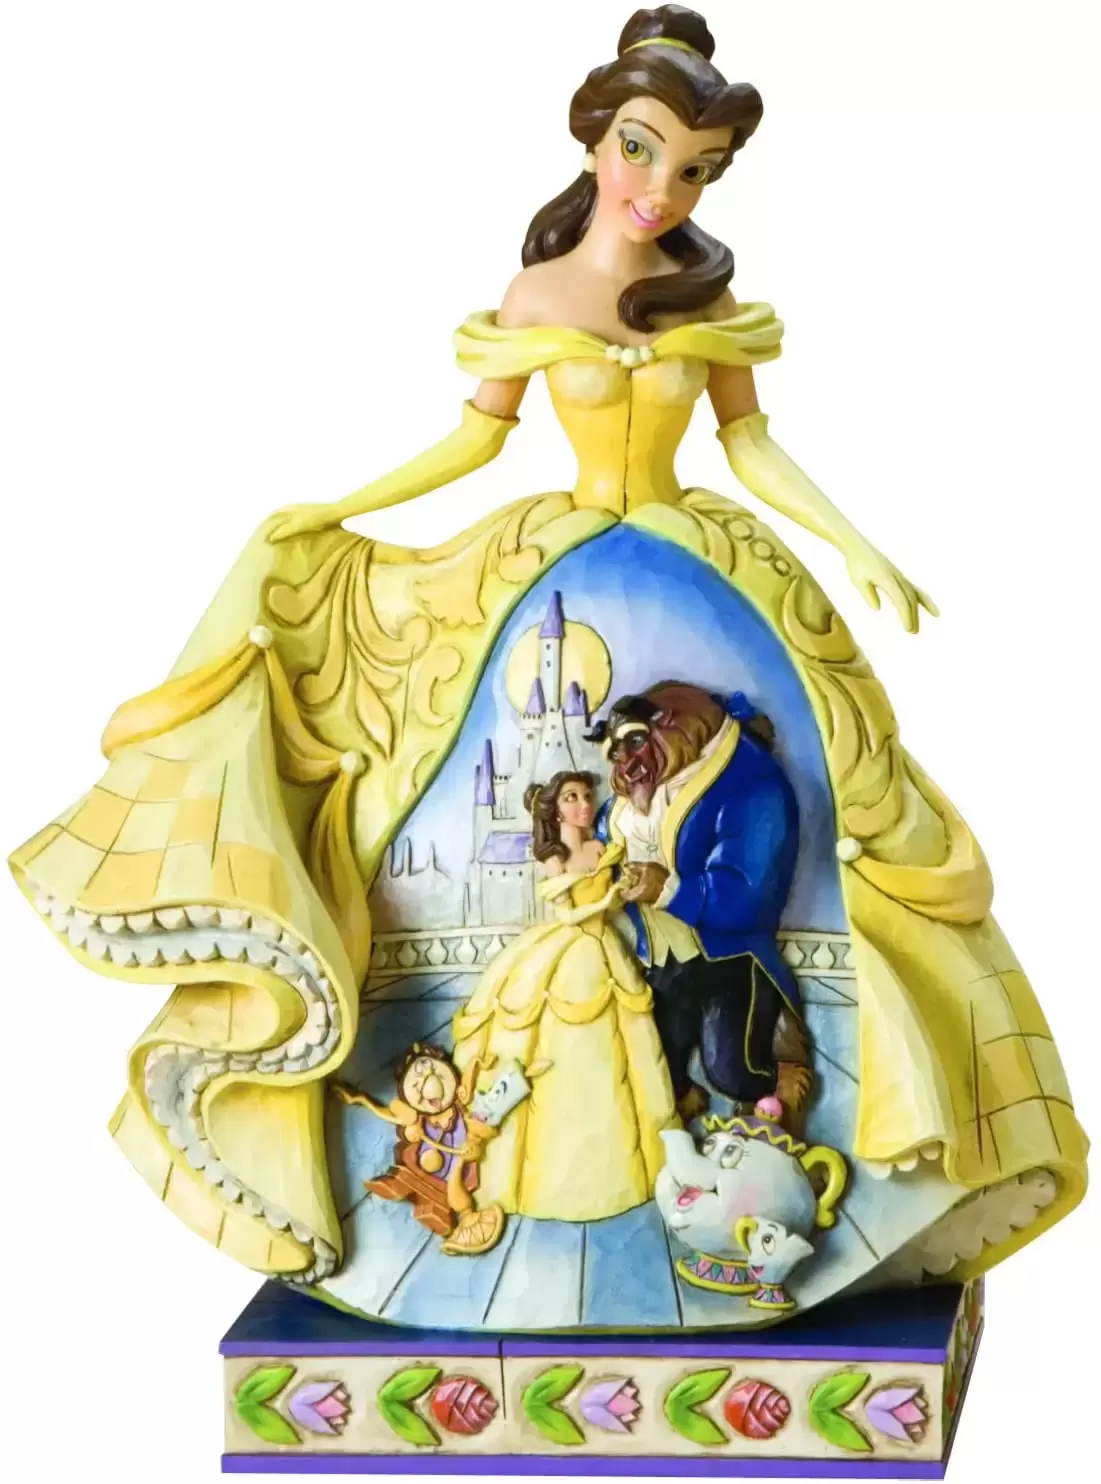 Disney Traditions by Jim Shore - Belle